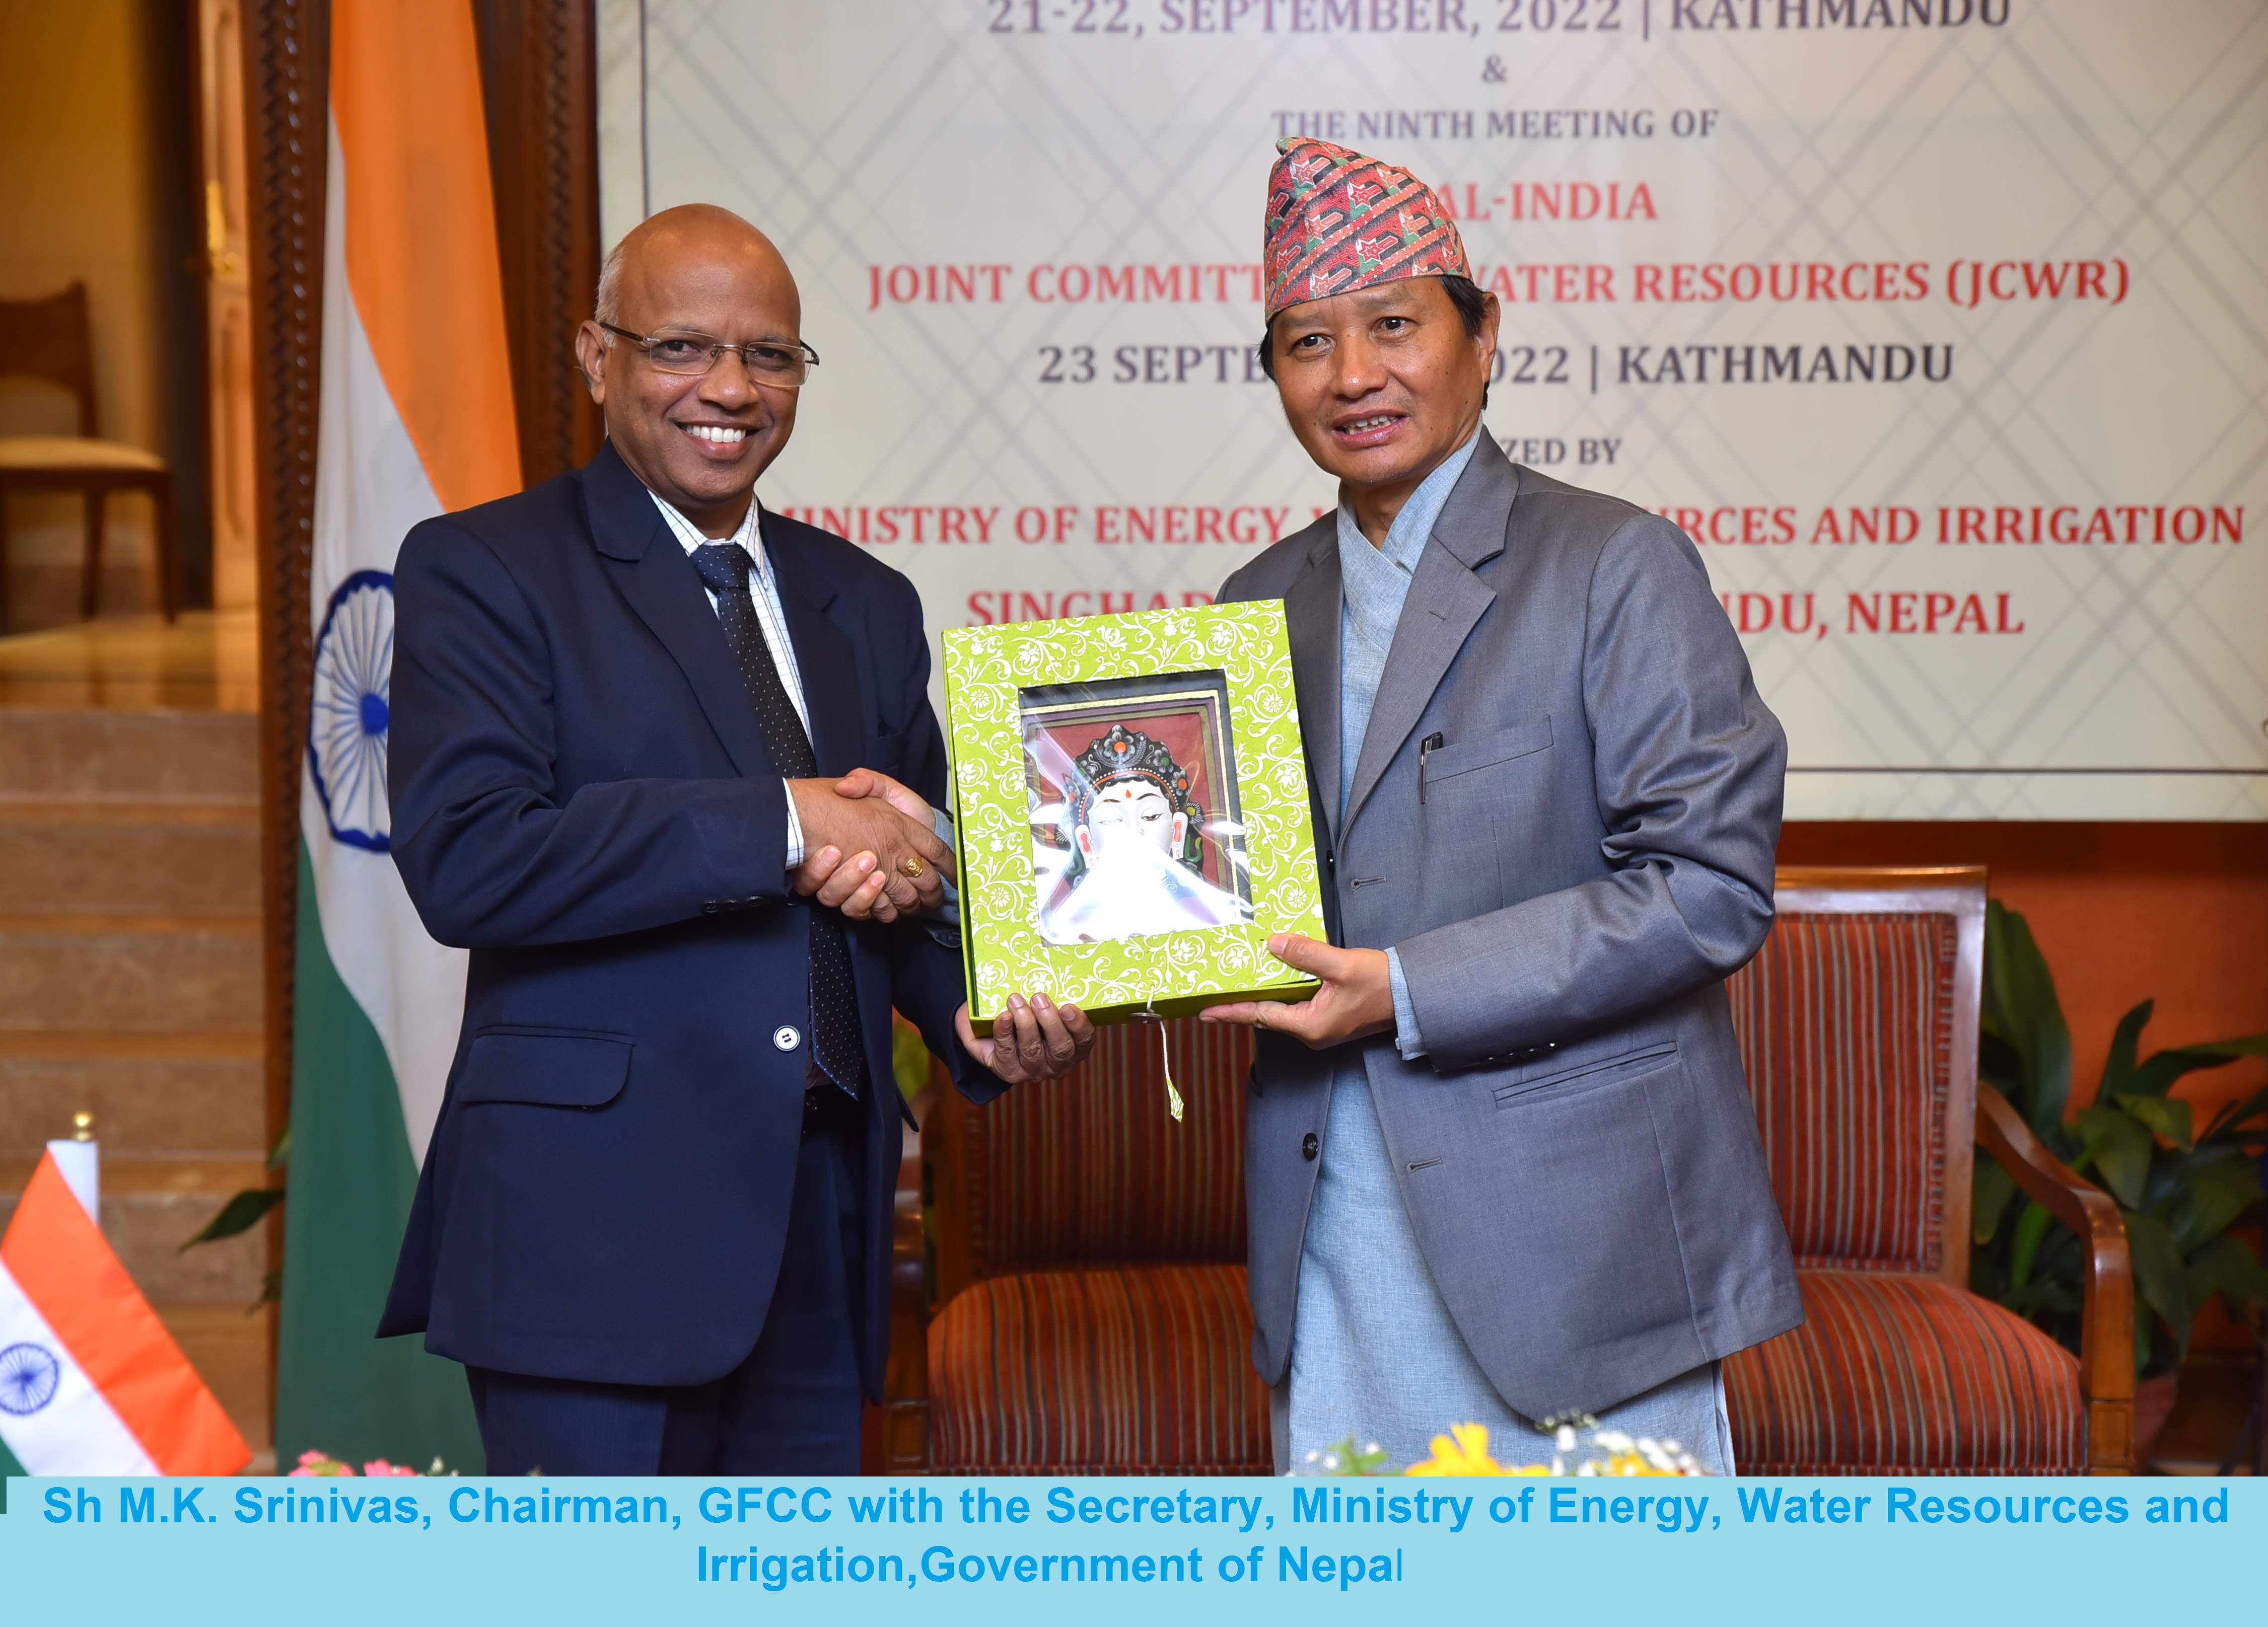 Sh M.K. Srinivas, Chairman, GFCC with the Secretary, Ministry of Energy, Water Resources and Irrigation, Government of Nepal